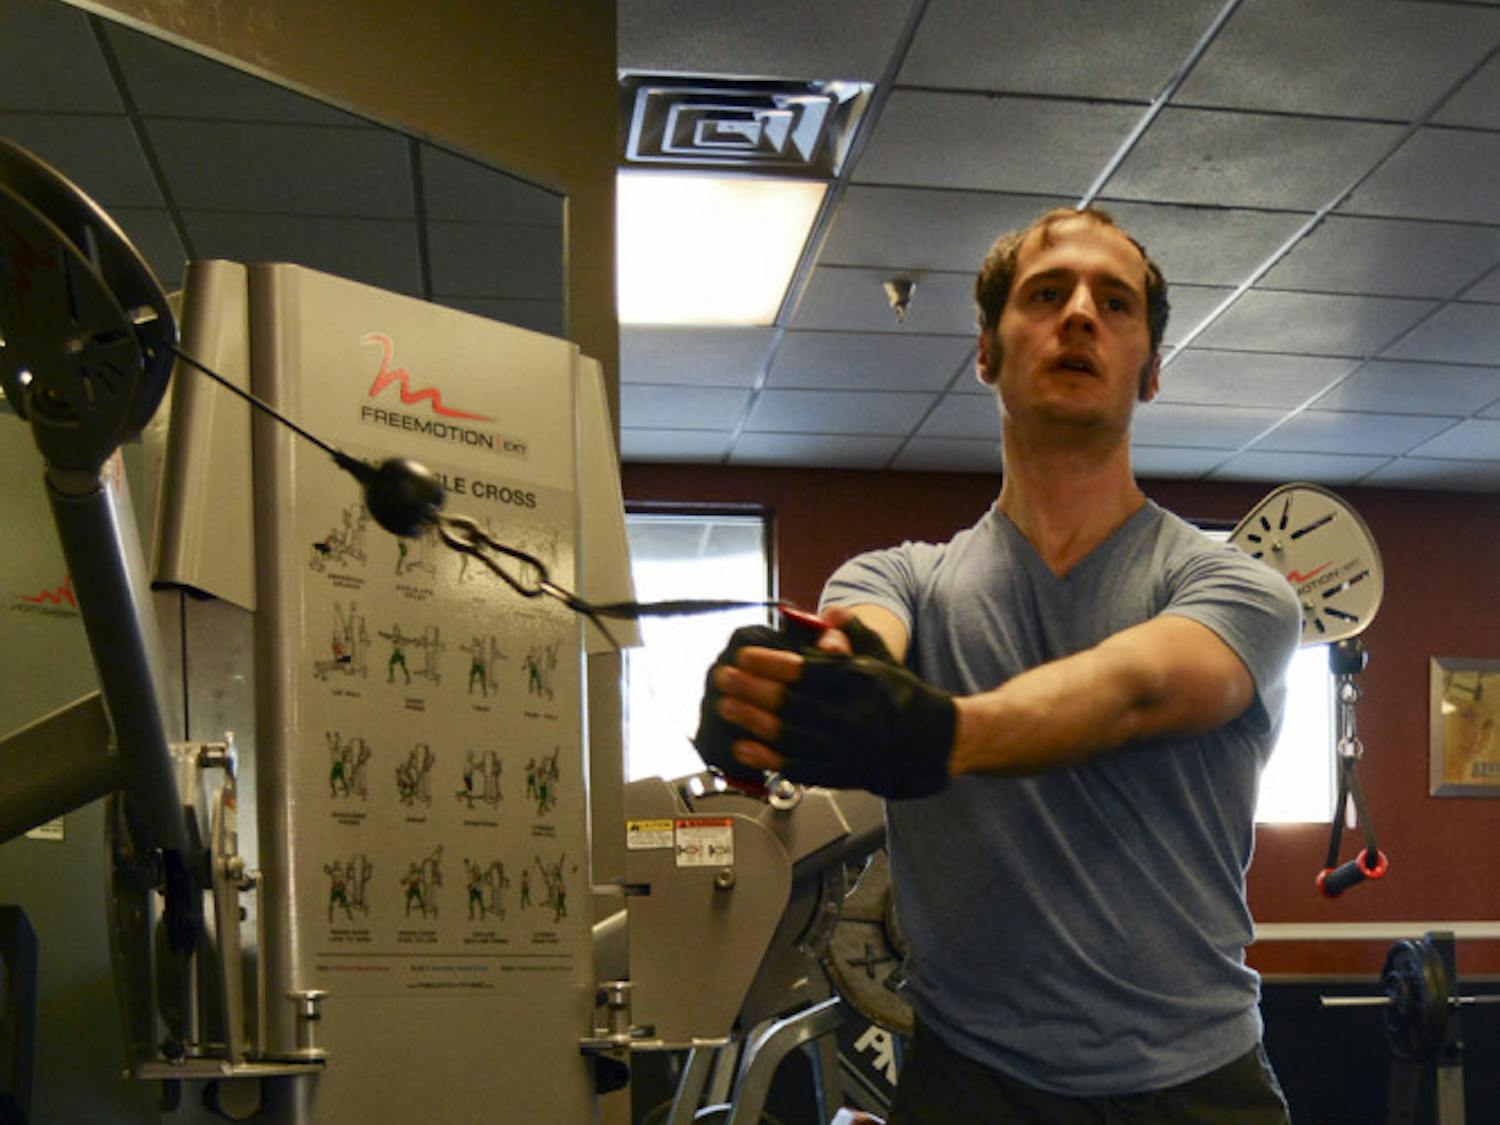 John David Eriksen, a 32-year-old software engineer and musician, works out at Alter Ego Fitness at 101 SE 2nd Place on Thursday evening.